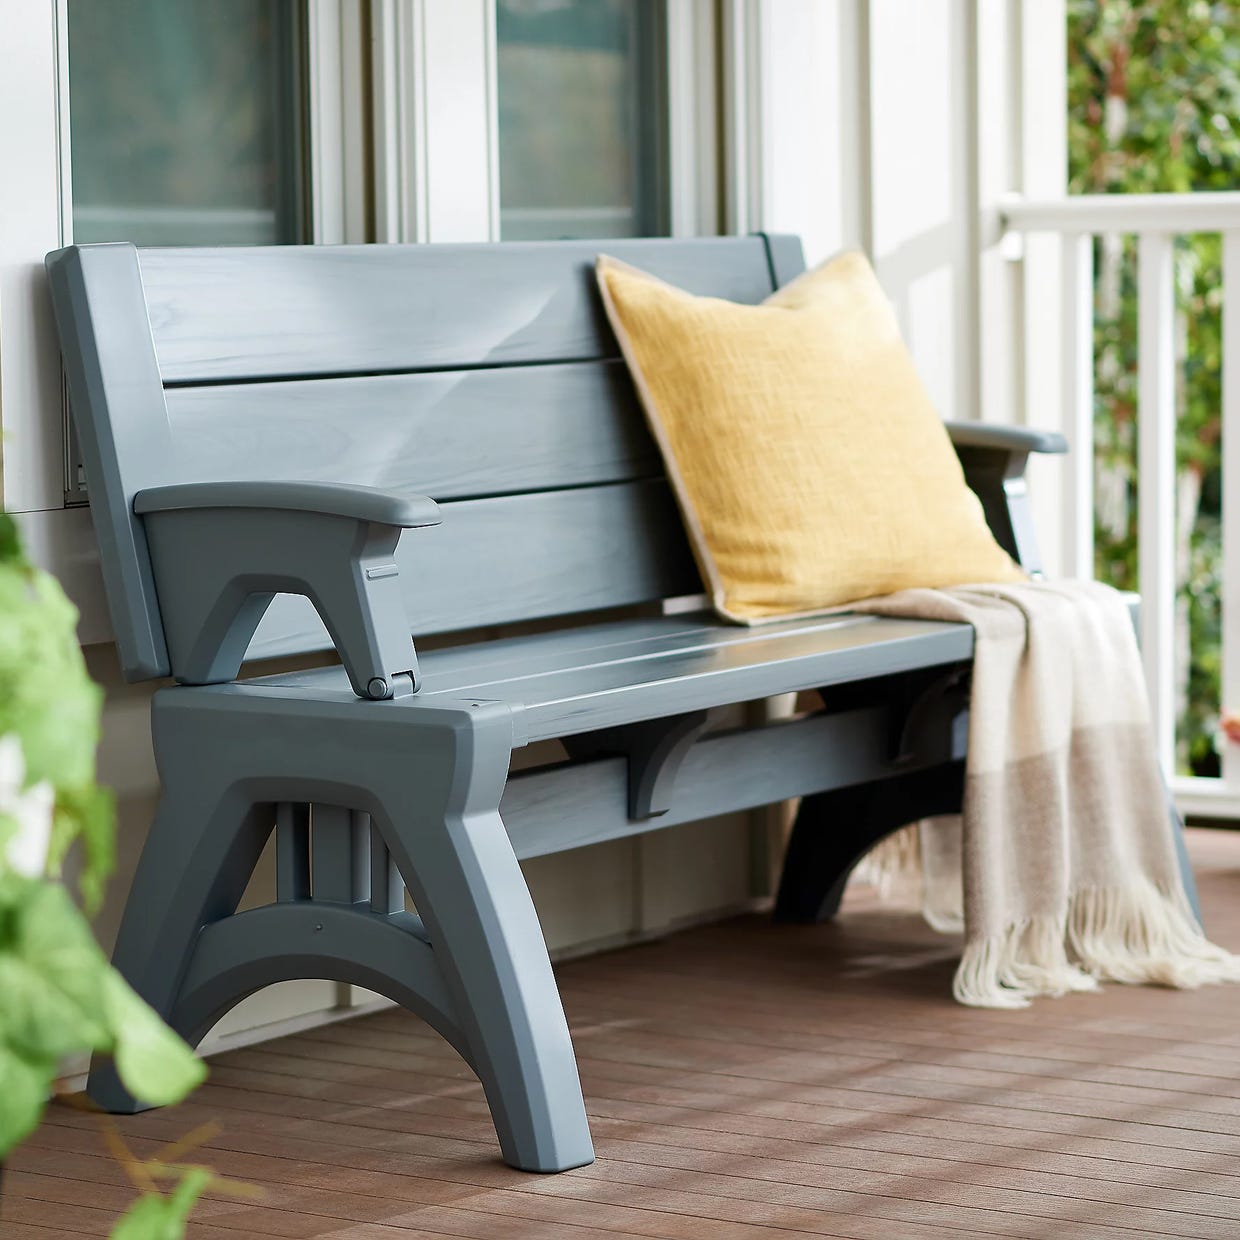 A gray outdoor bench with armrests, a yellow cushion, and a beige throw blanket on a wooden deck.